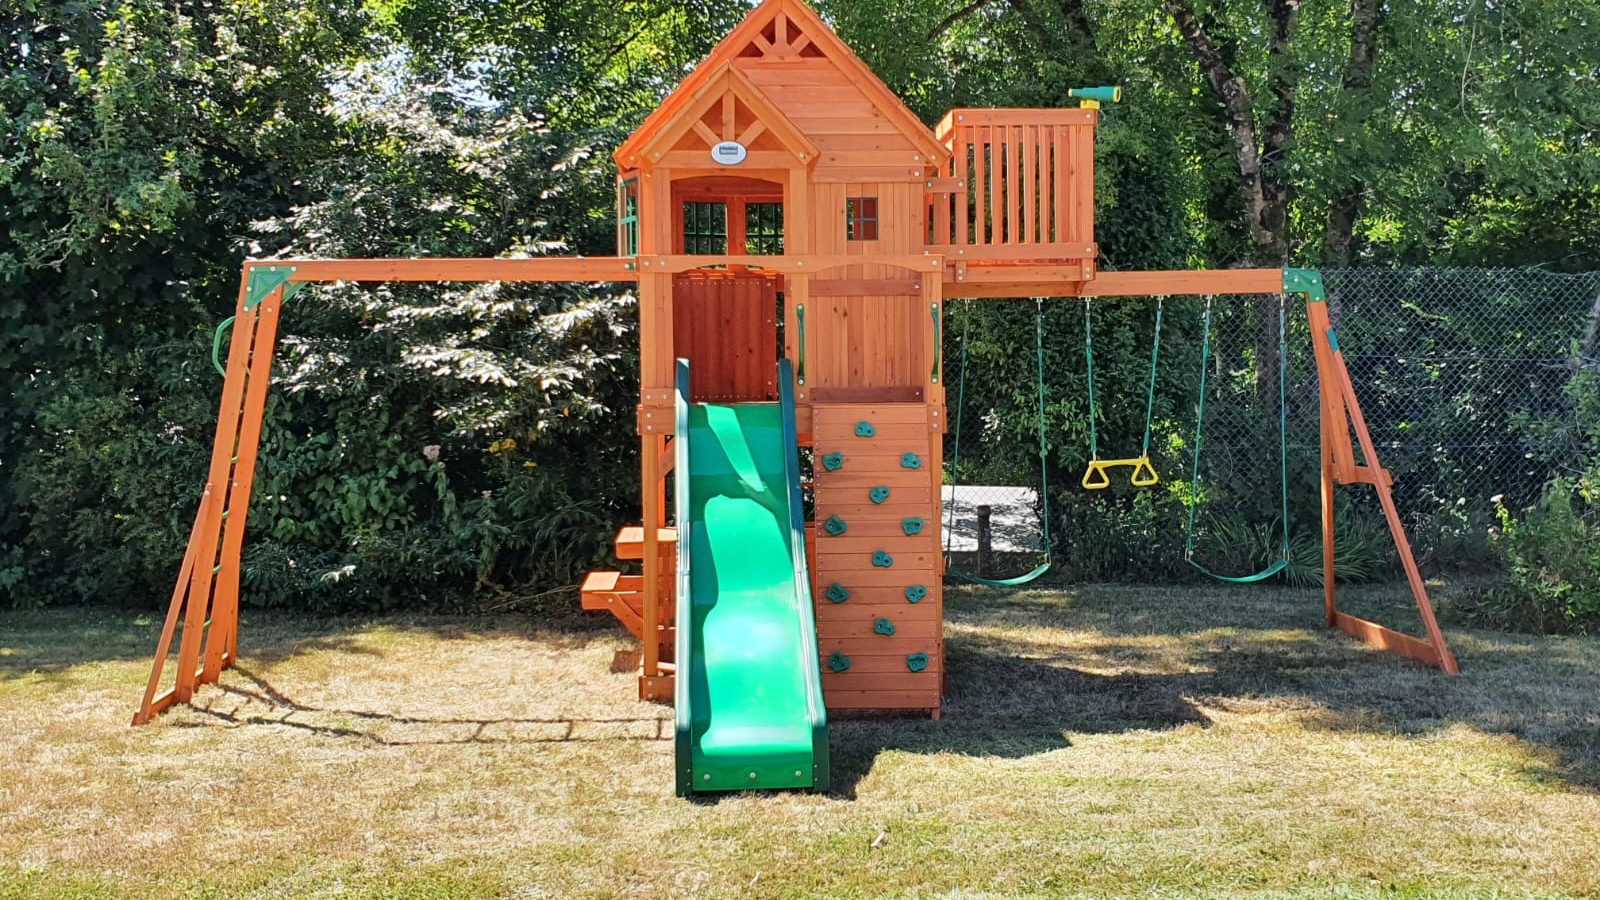 The School of Fun Play Area - kate & tom's Large Holiday Homes